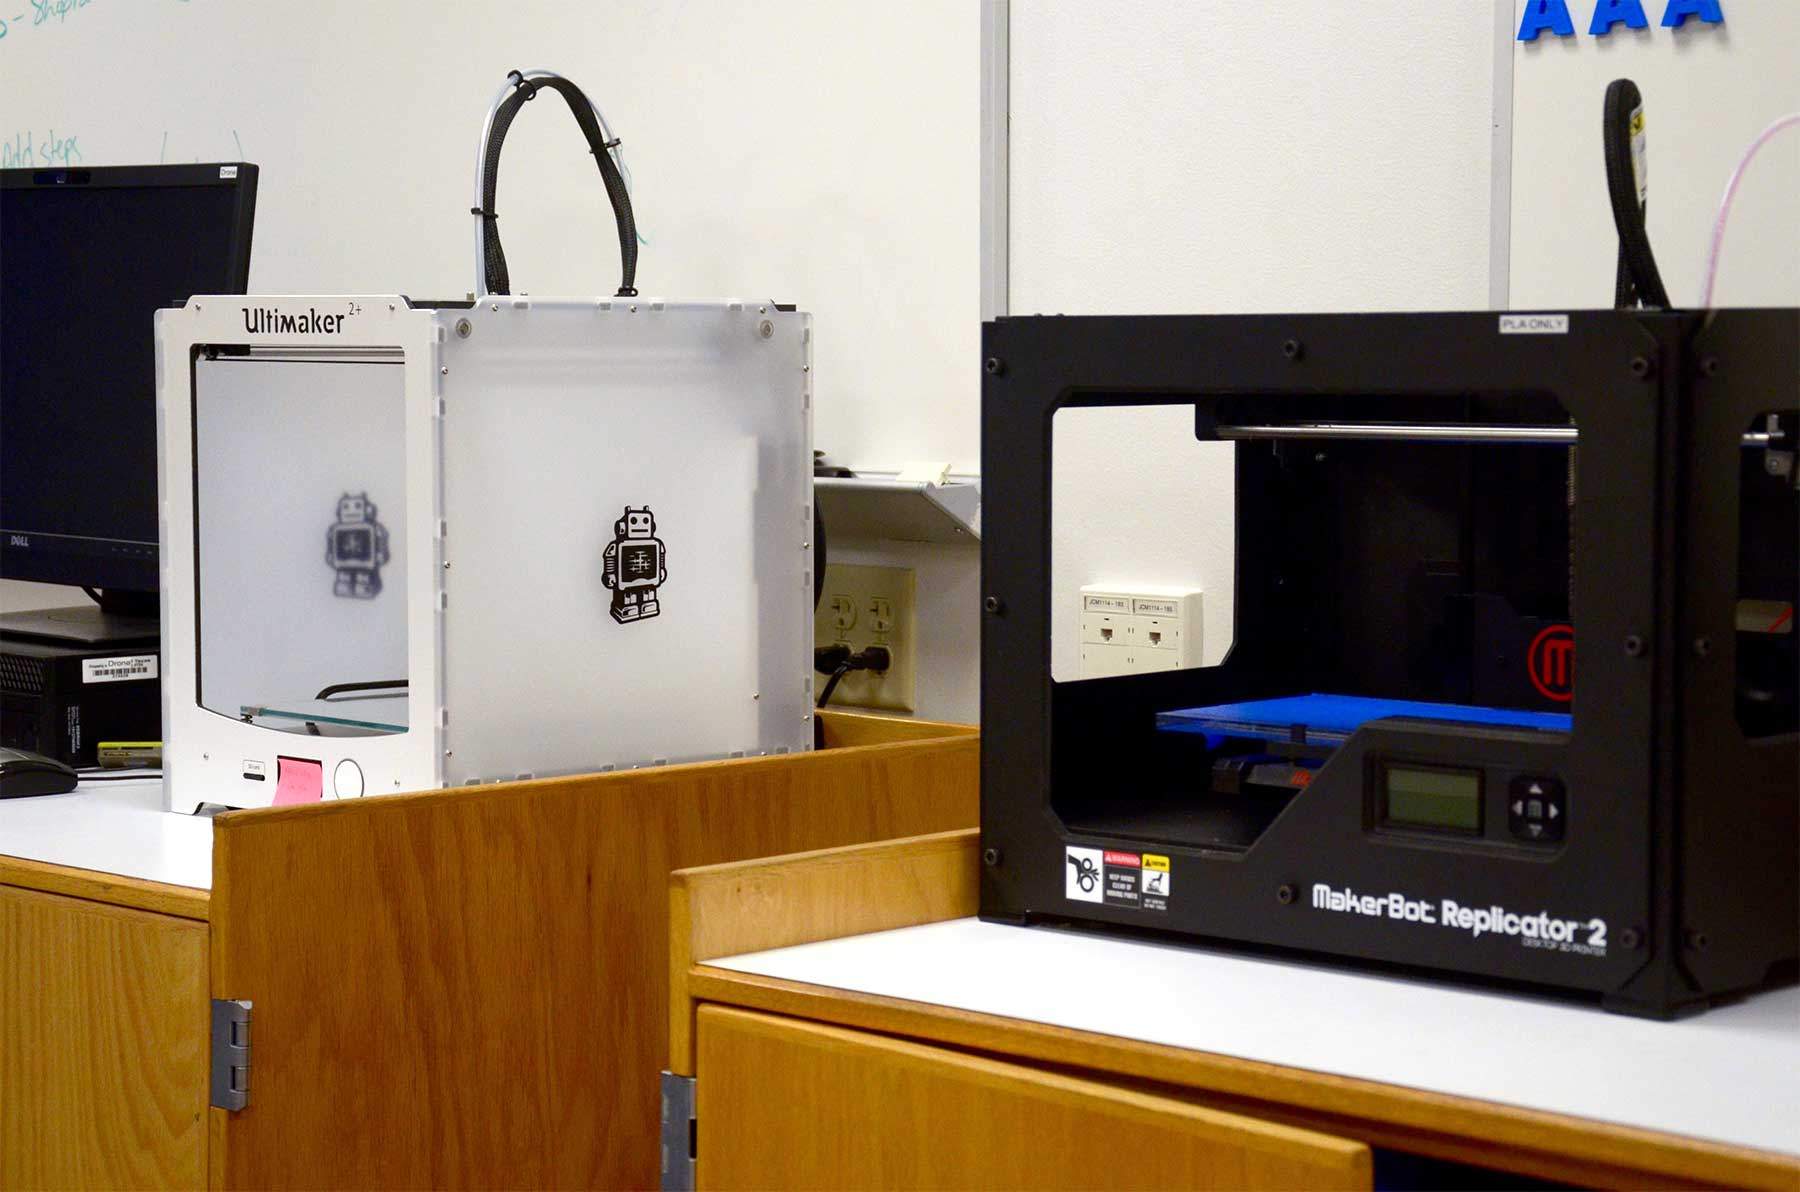 Two 3D printing stations with dedicated computers